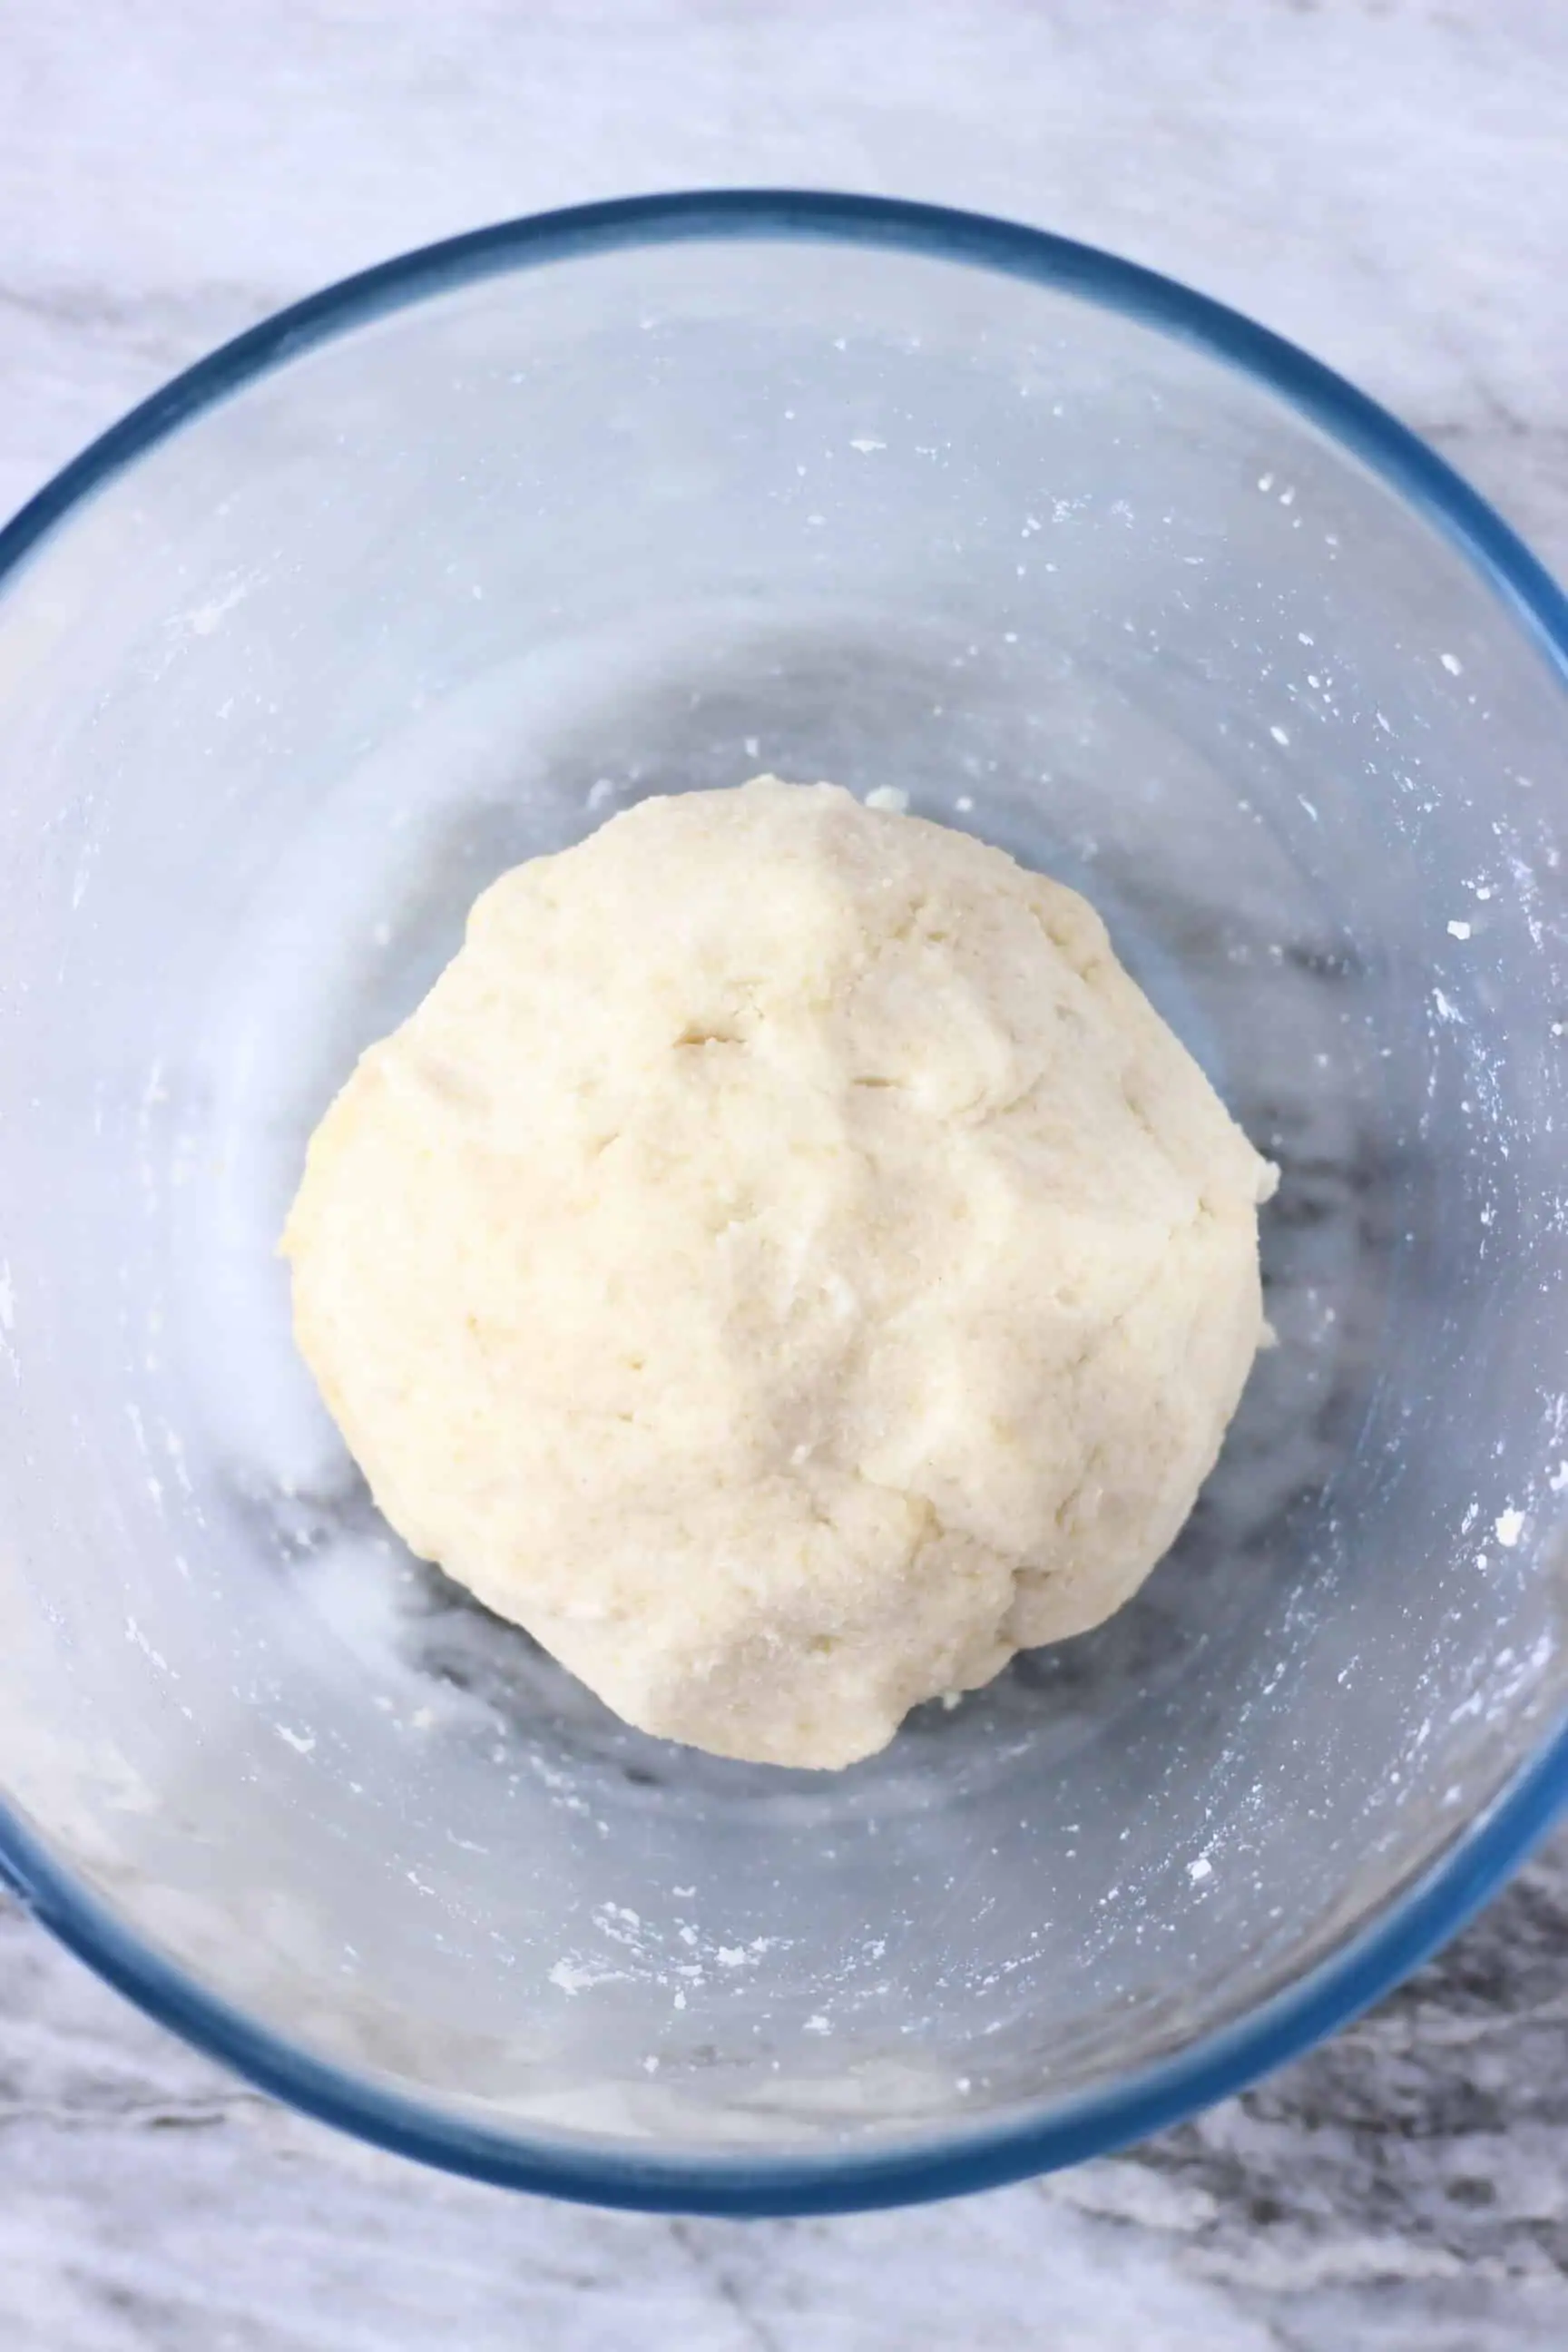 Raw gluten-free vegan pastry dough in a glass mixing bowl